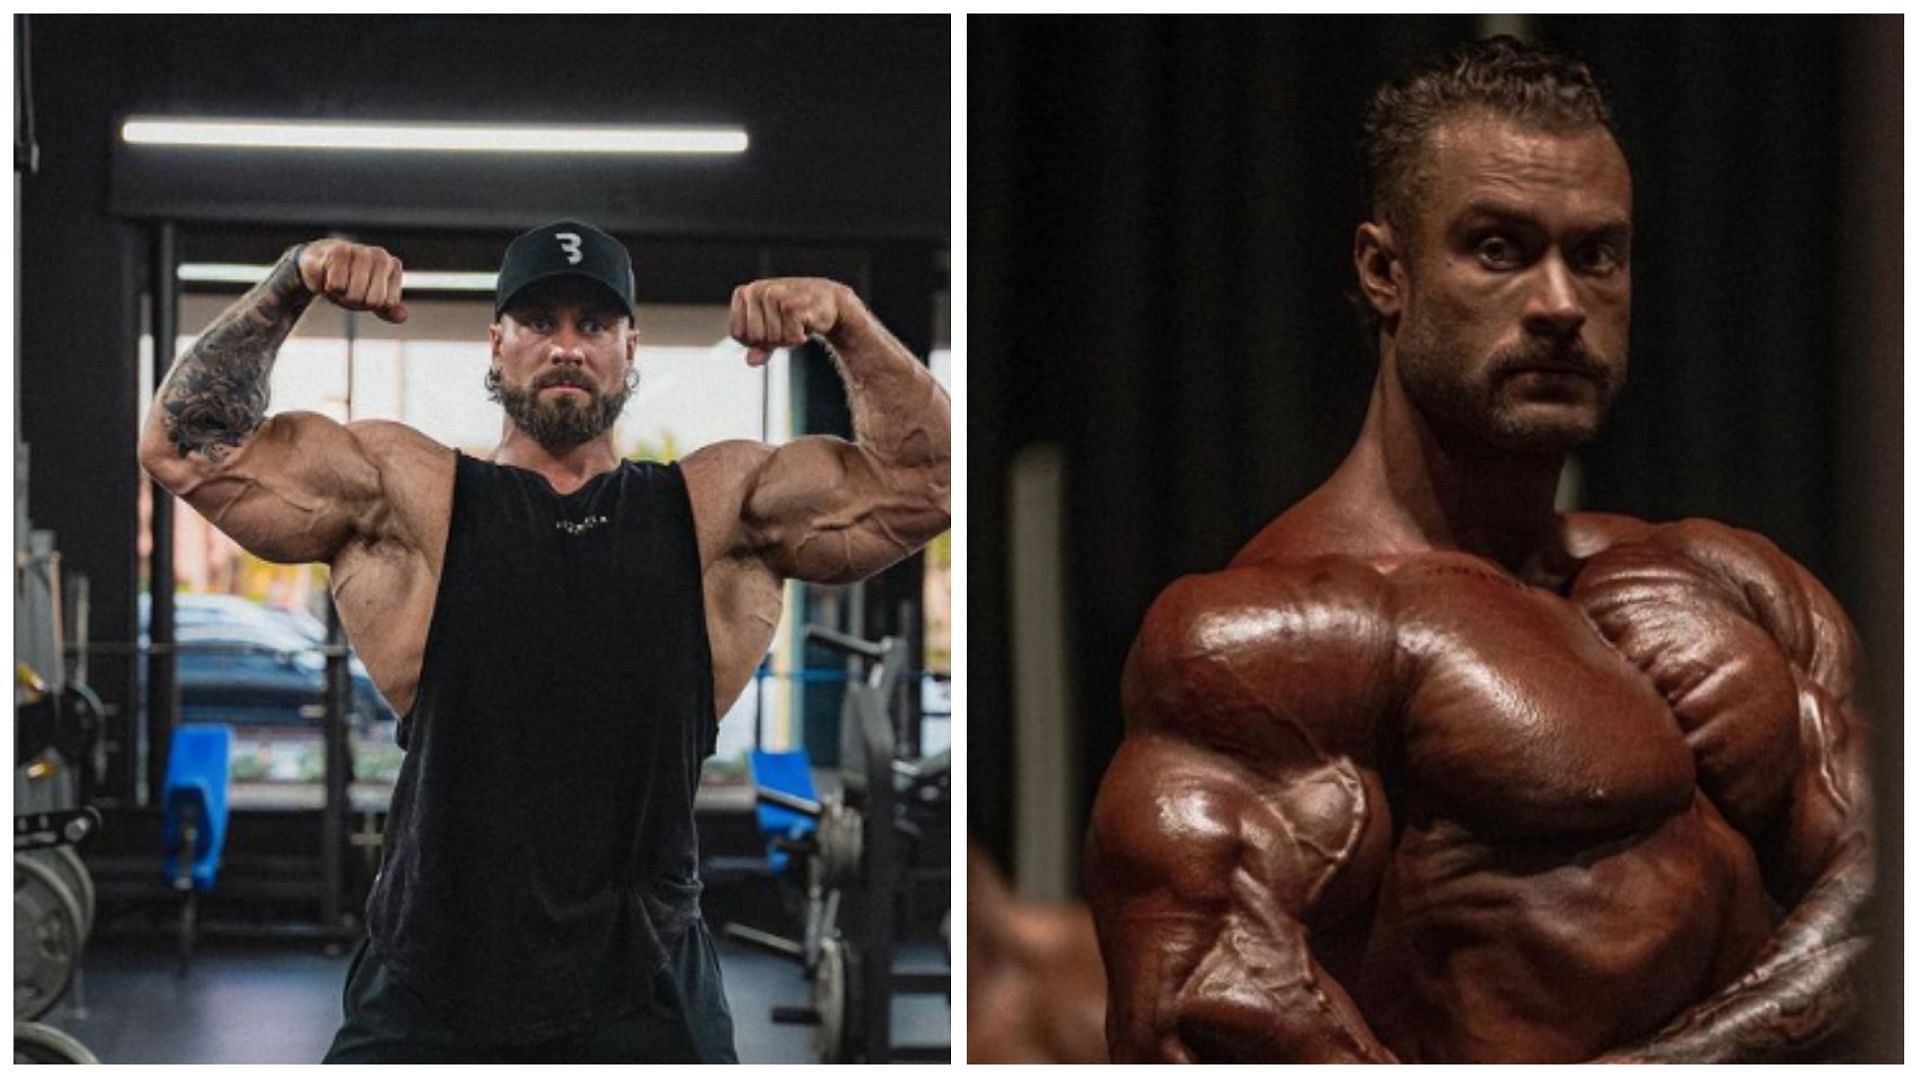 Bumstead applies mind-muscular connection to work his back muscles. (Image via Instargam @cbum)